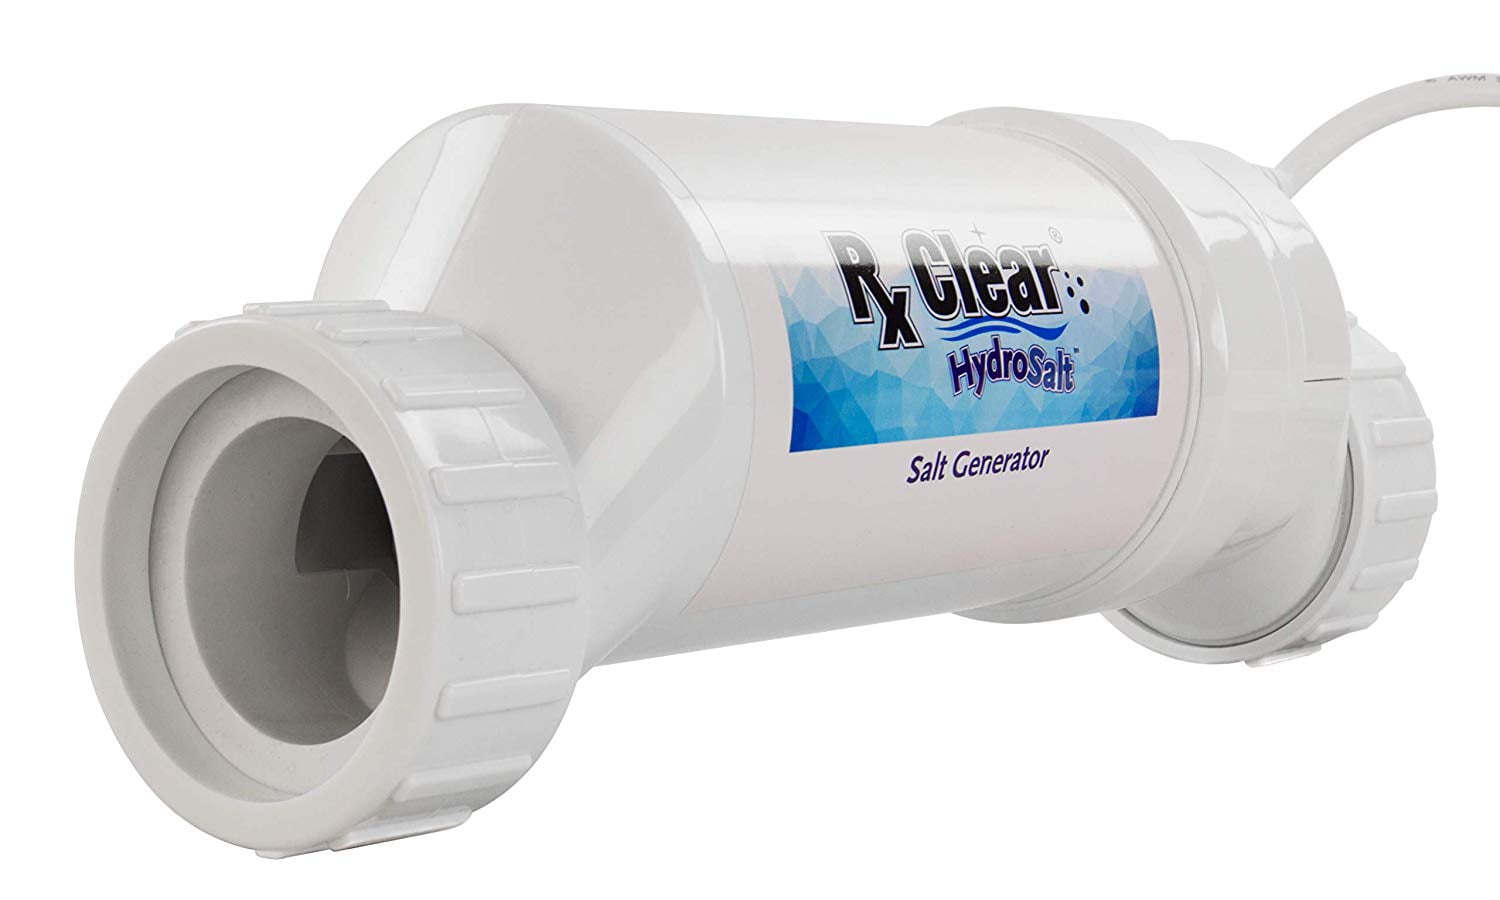 Rx Clear HydroSalt Replacement Cell for 20,000 Gal swimming Walmart.com